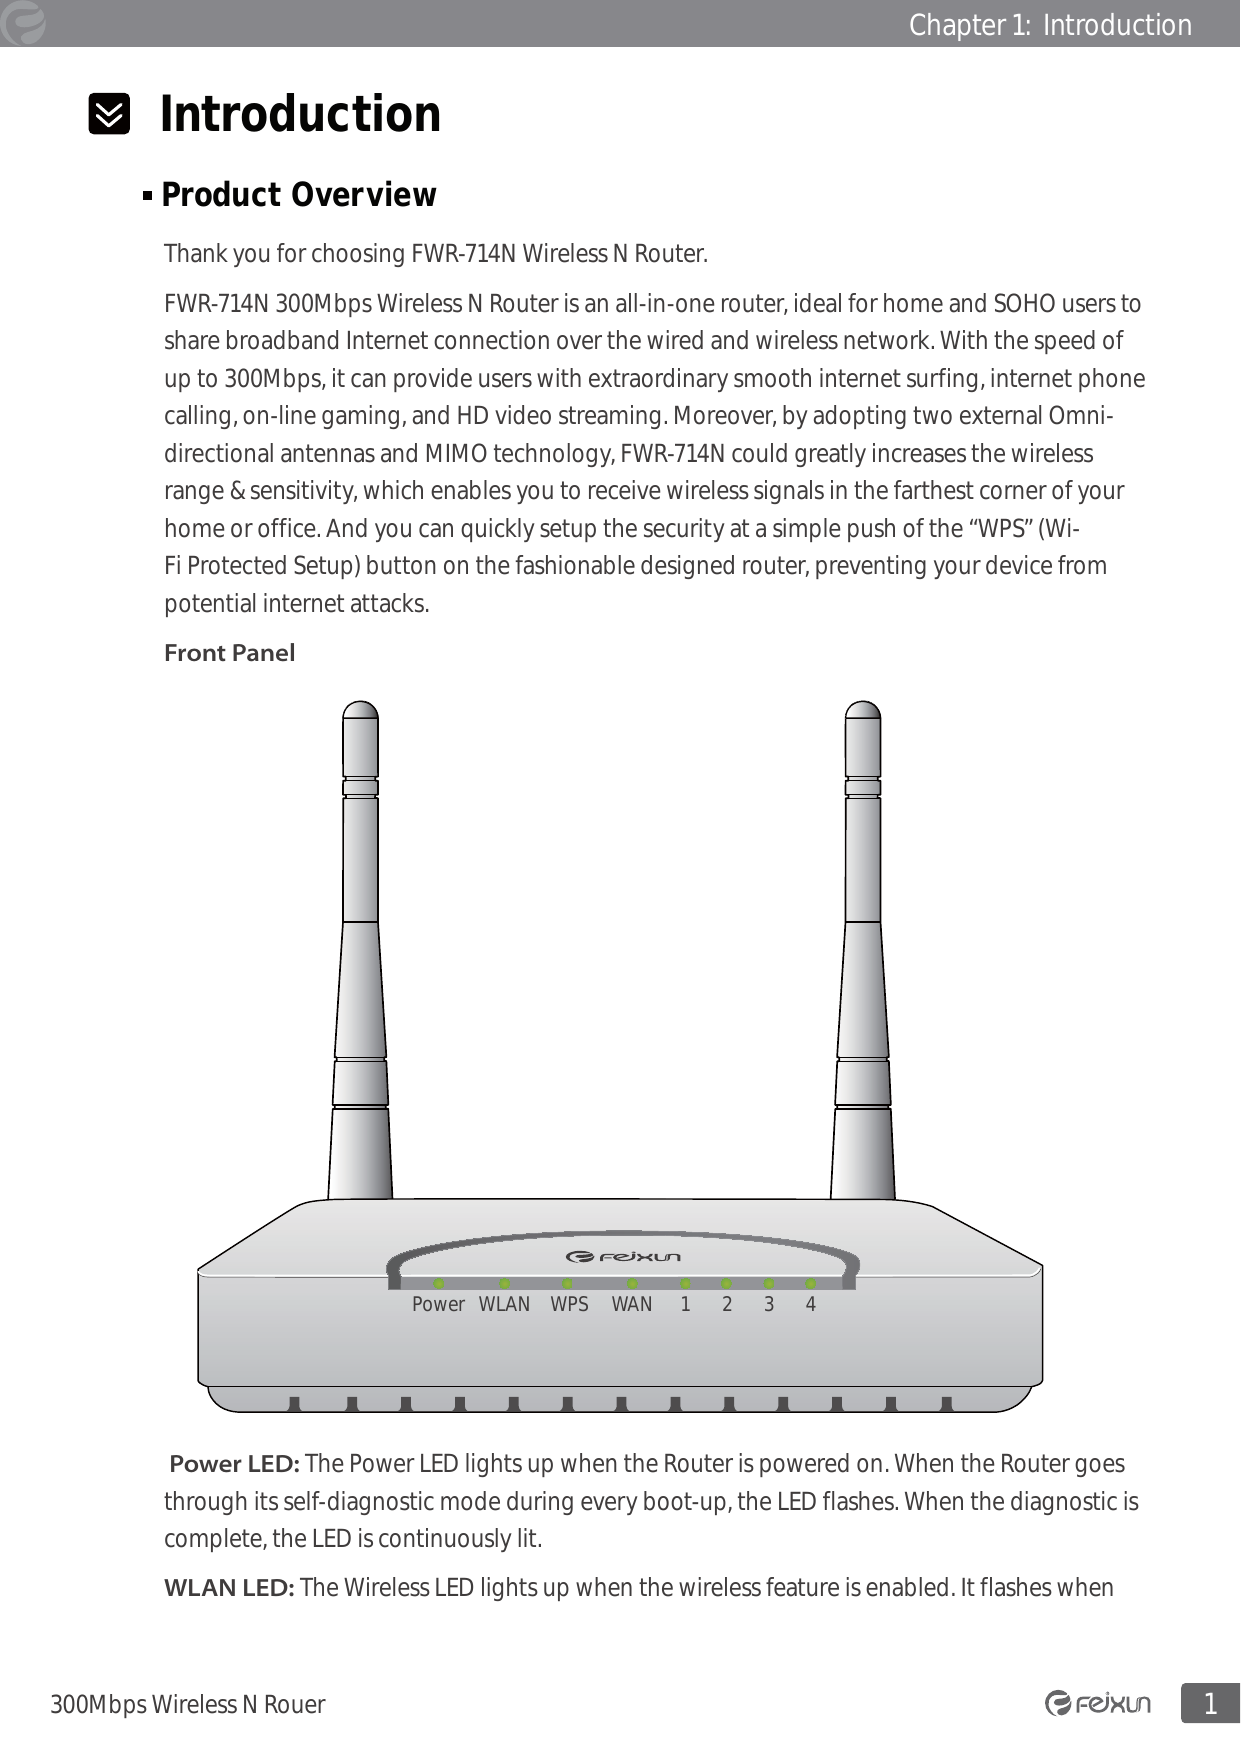 1300Mbps Wireless N RouerChapter 1:  Introduction  Introduction Product Overview                                                                                                  Thank you for choosing FWR-714N Wireless N Router. FWR-714N 300Mbps Wireless N Router is an all-in-one router, ideal for home and SOHO users to share broadband Internet connection over the wired and wireless network. With the speed of up to 300Mbps, it can provide users with extraordinary smooth internet surfing, internet phone calling, on-line gaming, and HD video streaming. Moreover, by adopting two external Omni-directional antennas and MIMO technology, FWR-714N could greatly increases the wireless range &amp; sensitivity, which enables you to receive wireless signals in the farthest corner of your home or office. And you can quickly setup the security at a simple push of the “WPS” (Wi-Fi Protected Setup) button on the fashionable designed router, preventing your device from potential internet attacks. Front PanelPower WLAN WPS WAN 1 3 42 Power LED: The Power LED lights up when the Router is powered on. When the Router goes through its self-diagnostic mode during every boot-up, the LED flashes. When the diagnostic is complete, the LED is continuously lit.WLAN LED: The Wireless LED lights up when the wireless feature is enabled. It flashes when 